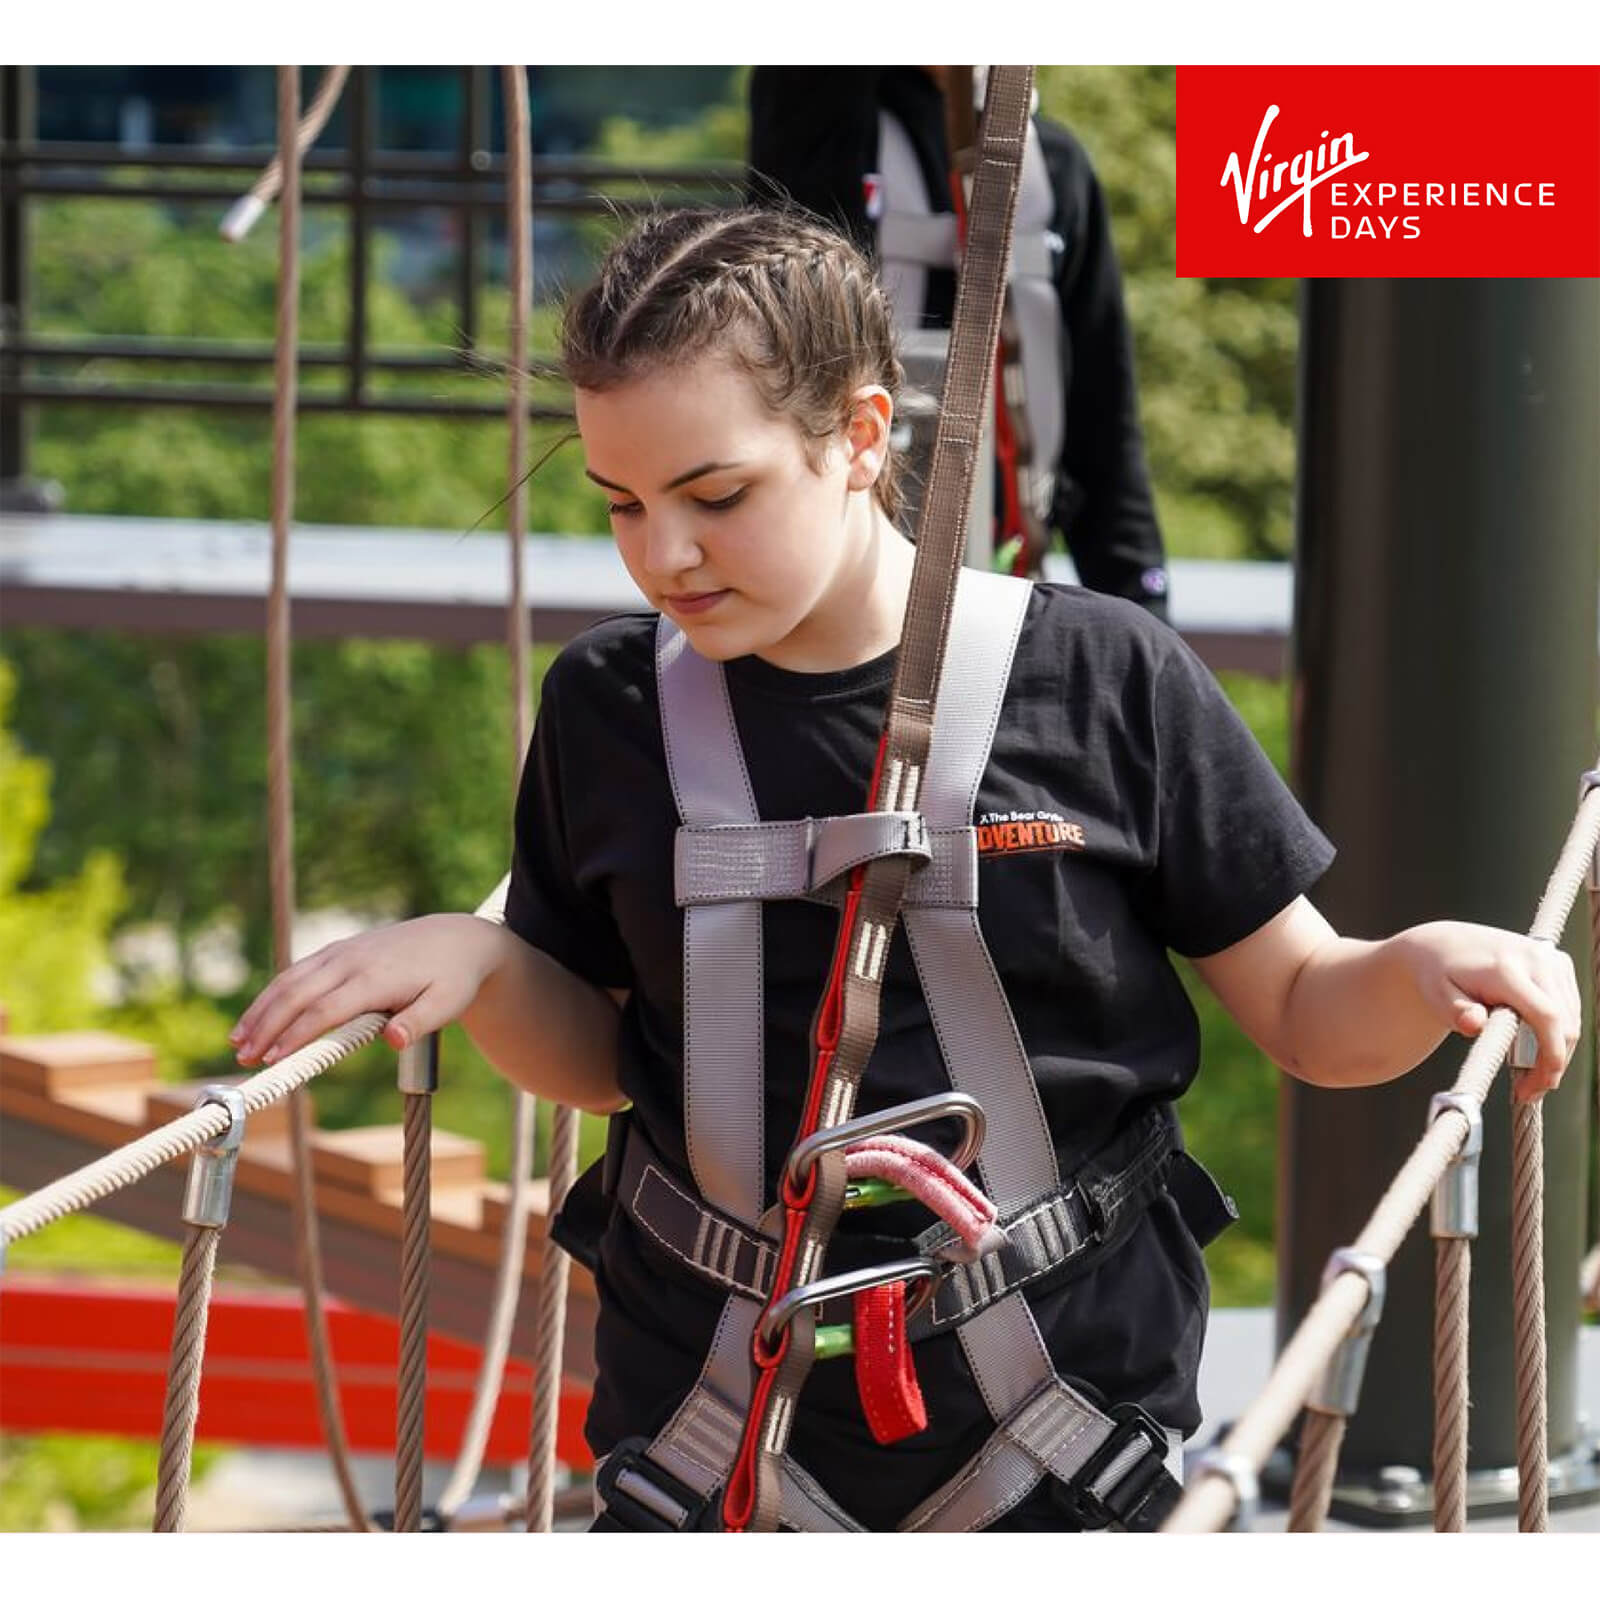 High Ropes Experience for Two at The Bear Grylls Adventure